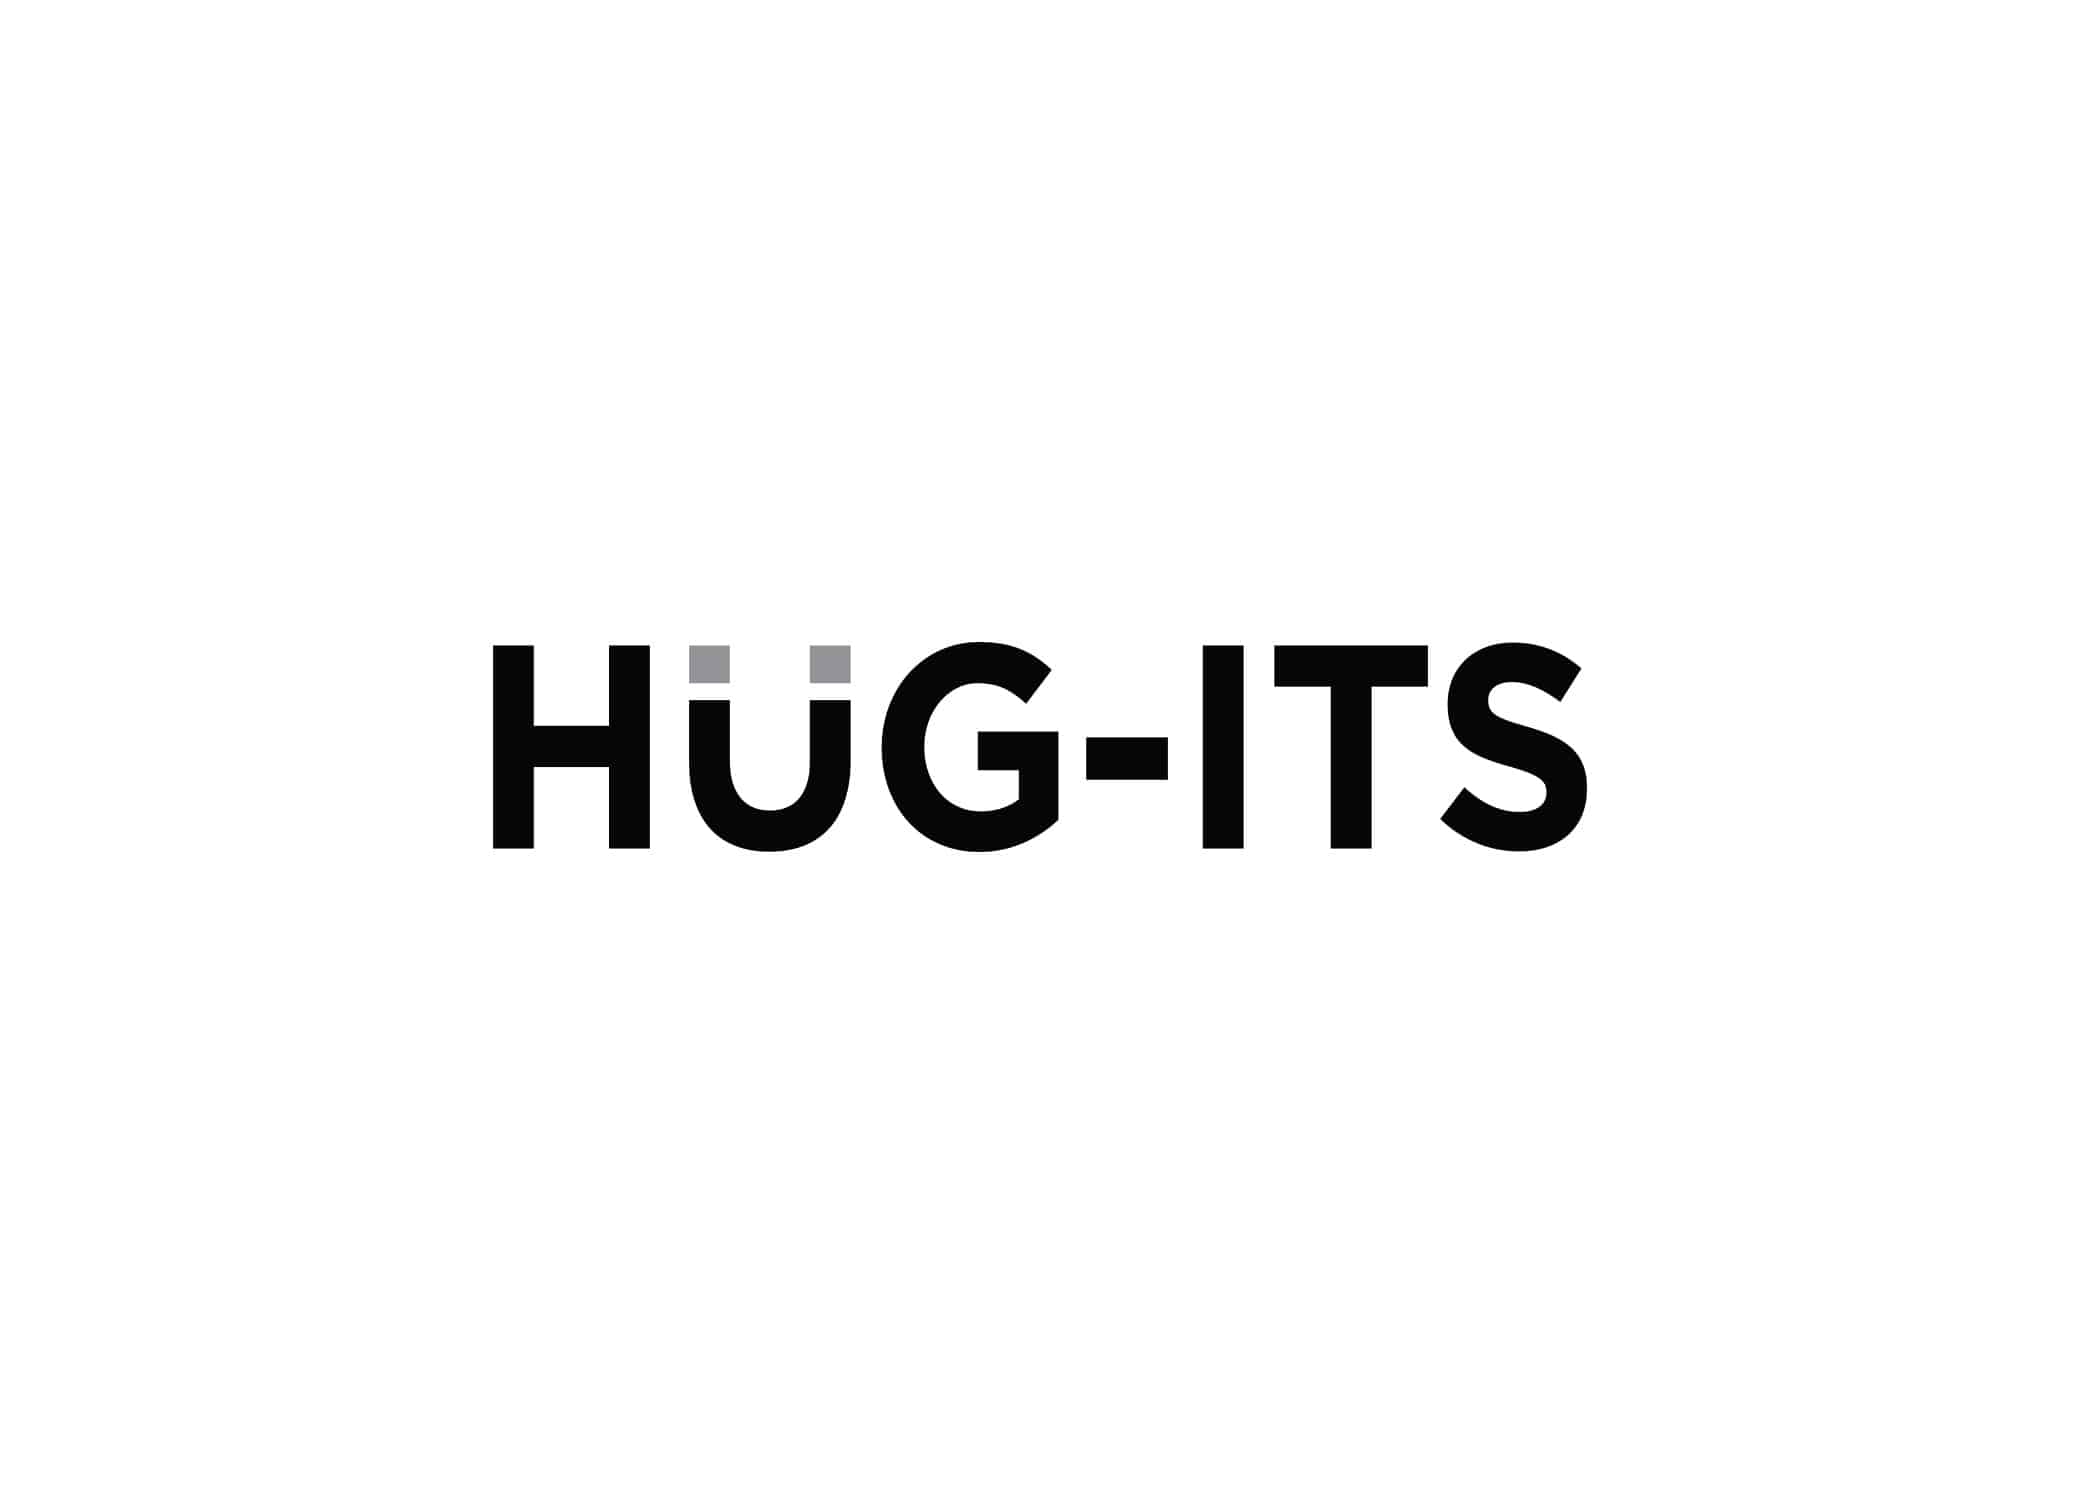 Hug-its logo design featuring the “u” as a magnet and bold black and gray sans serif font.